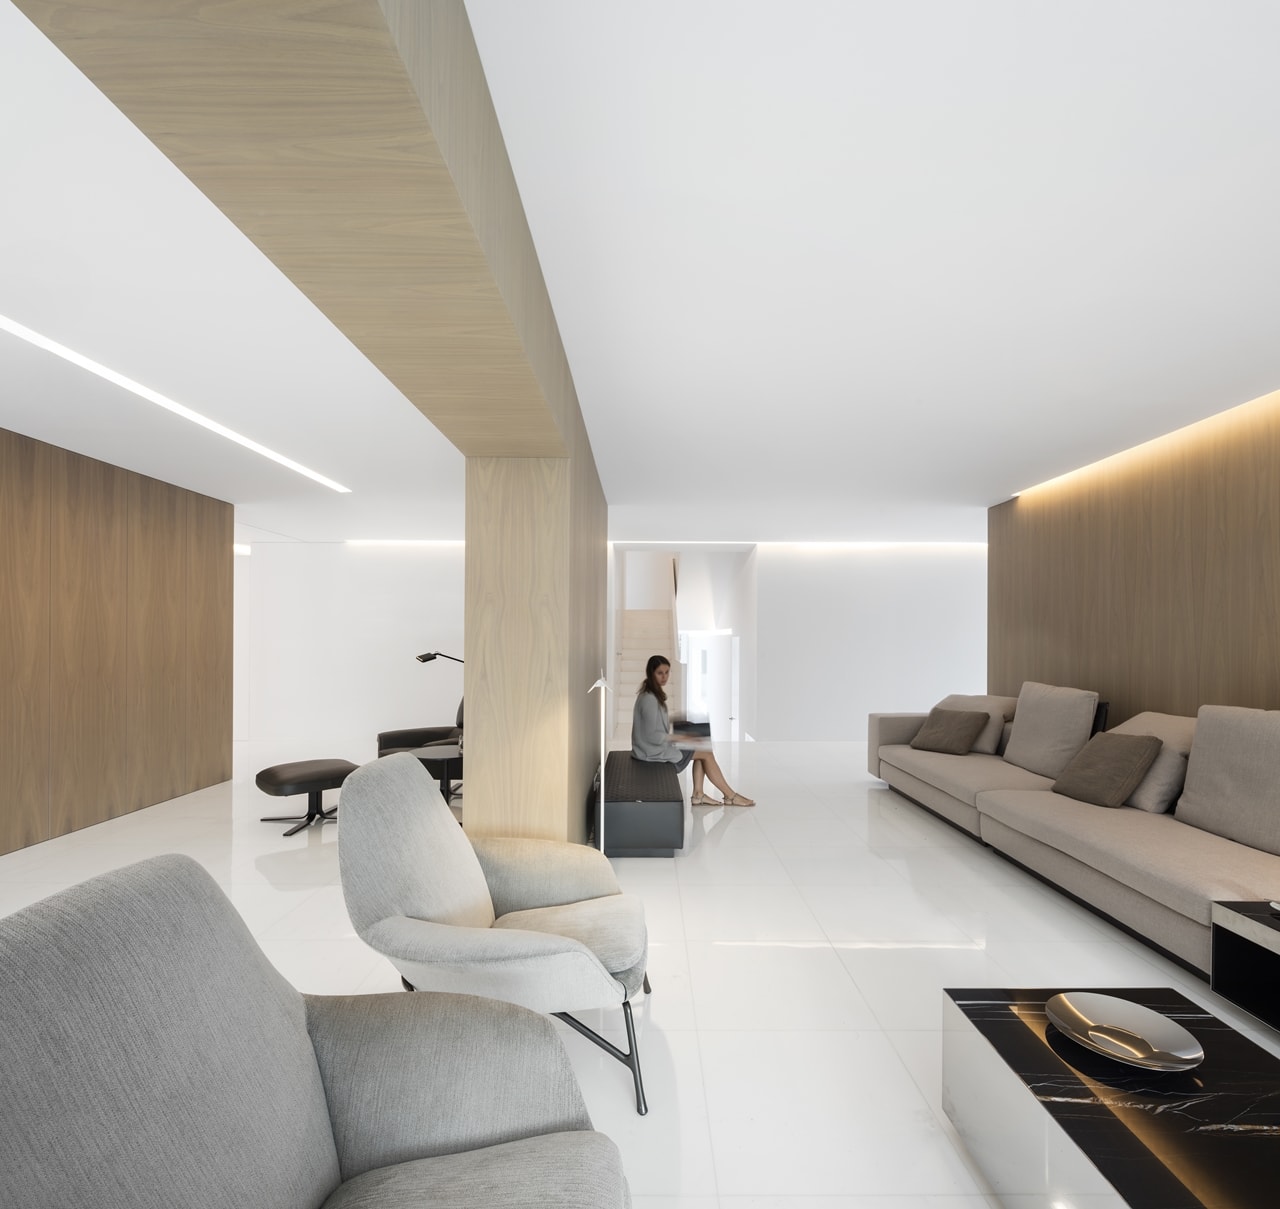 Minimalist living room design in minimalist house designed by Fran Silvestre Architects